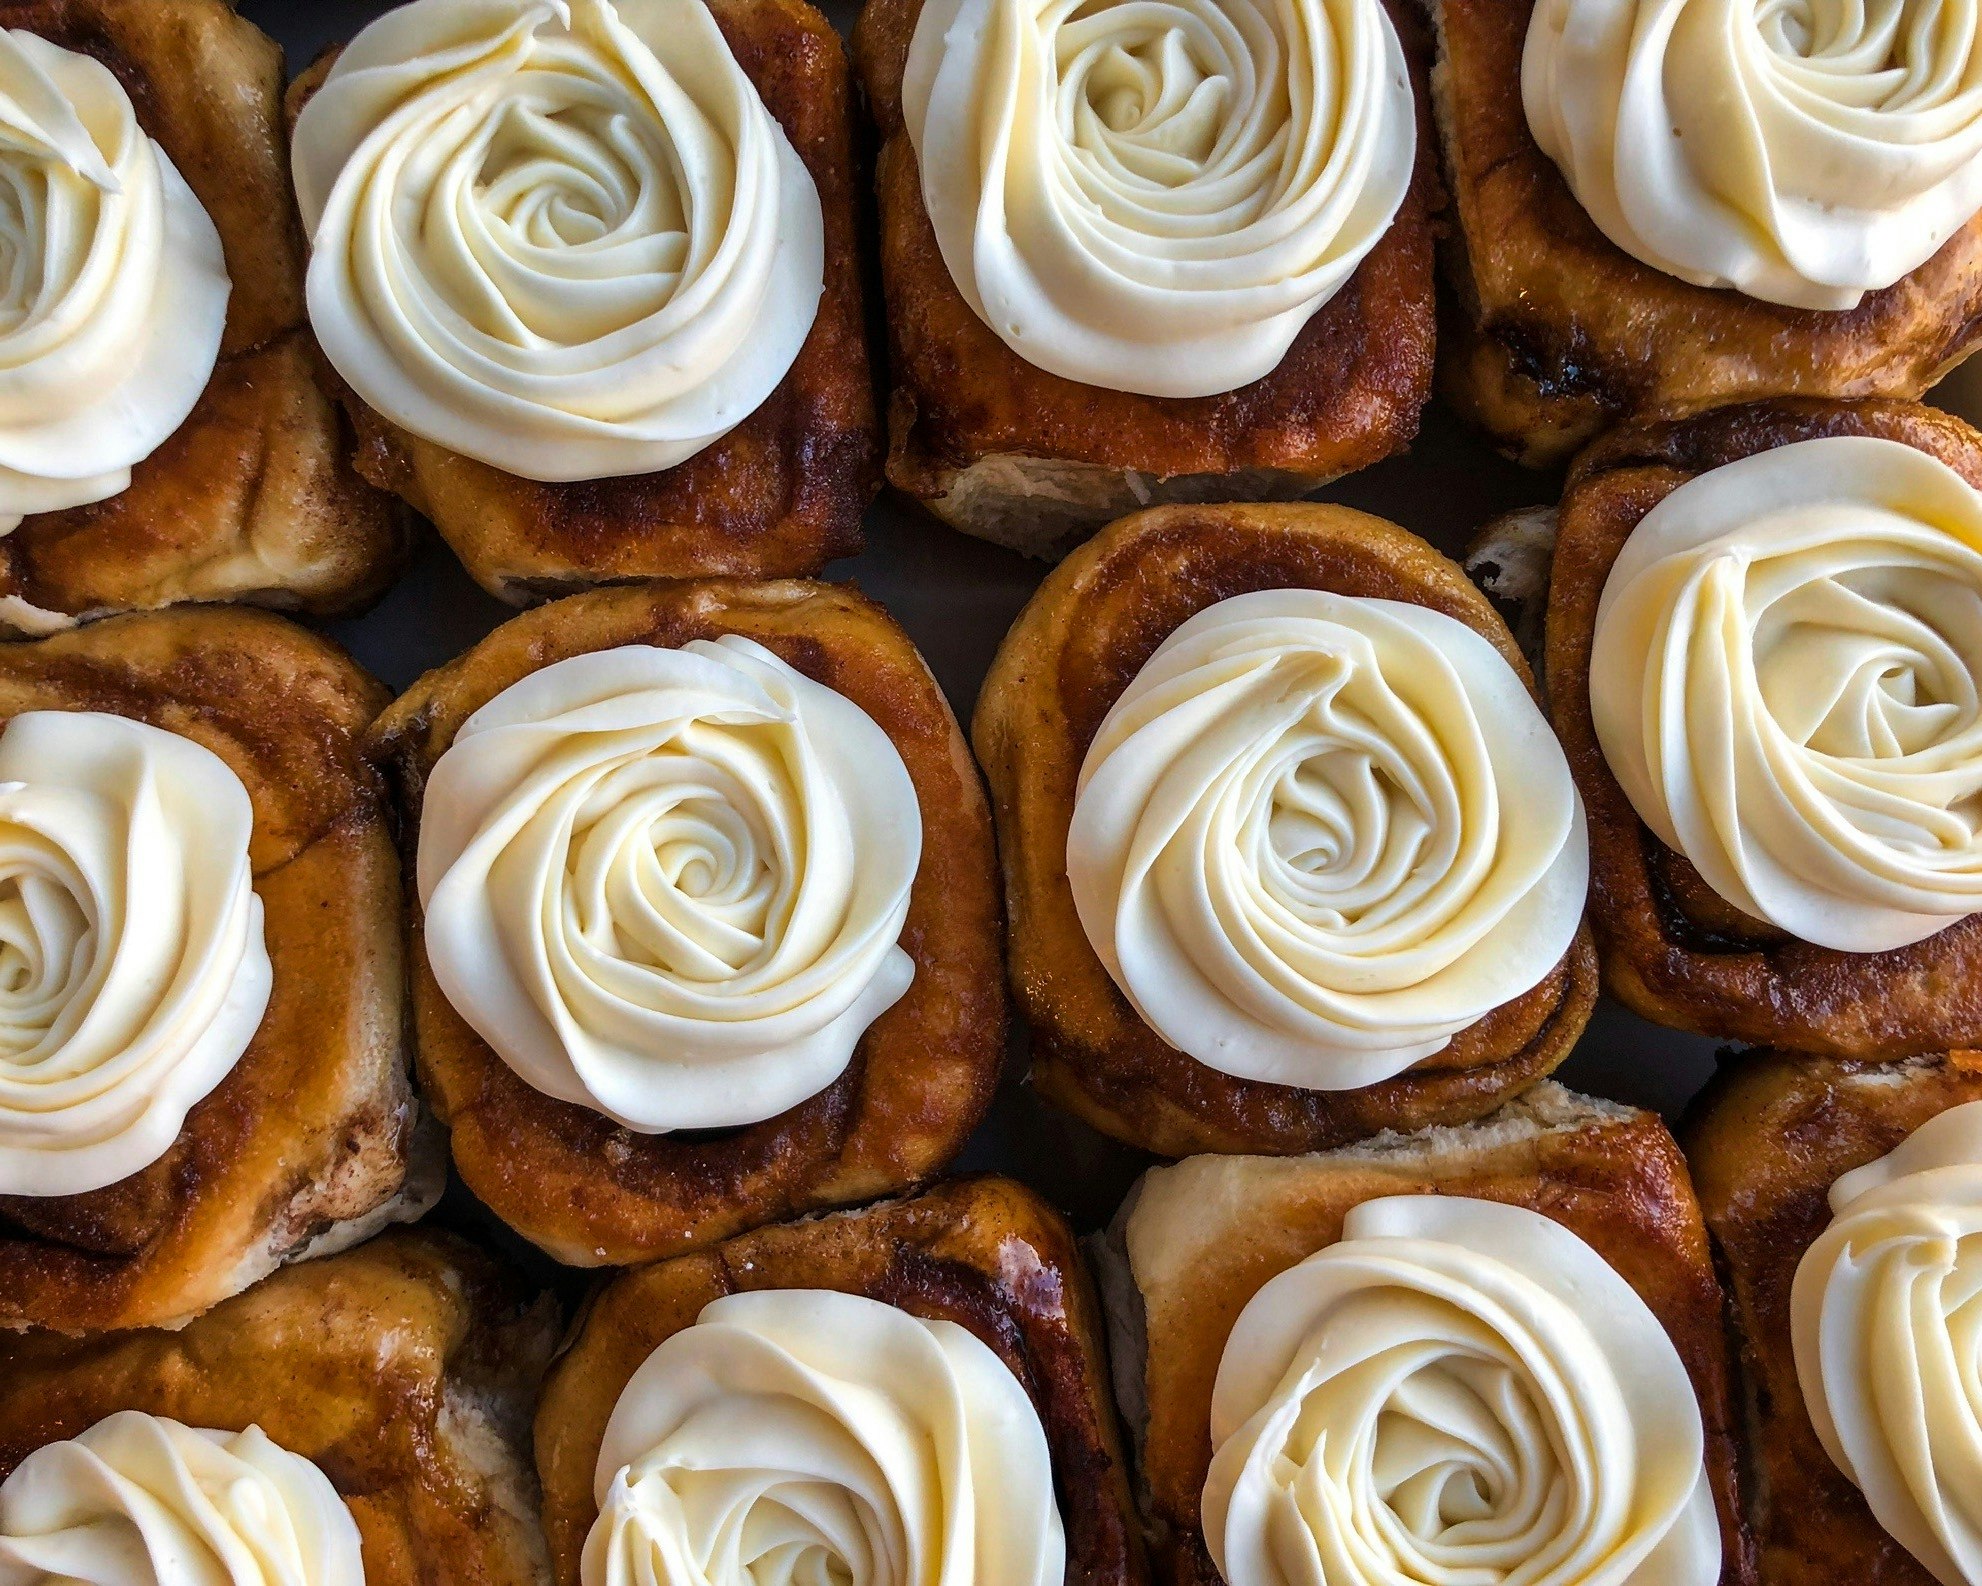 Rows of cinnamon rolls with cream cheese spiraled topping